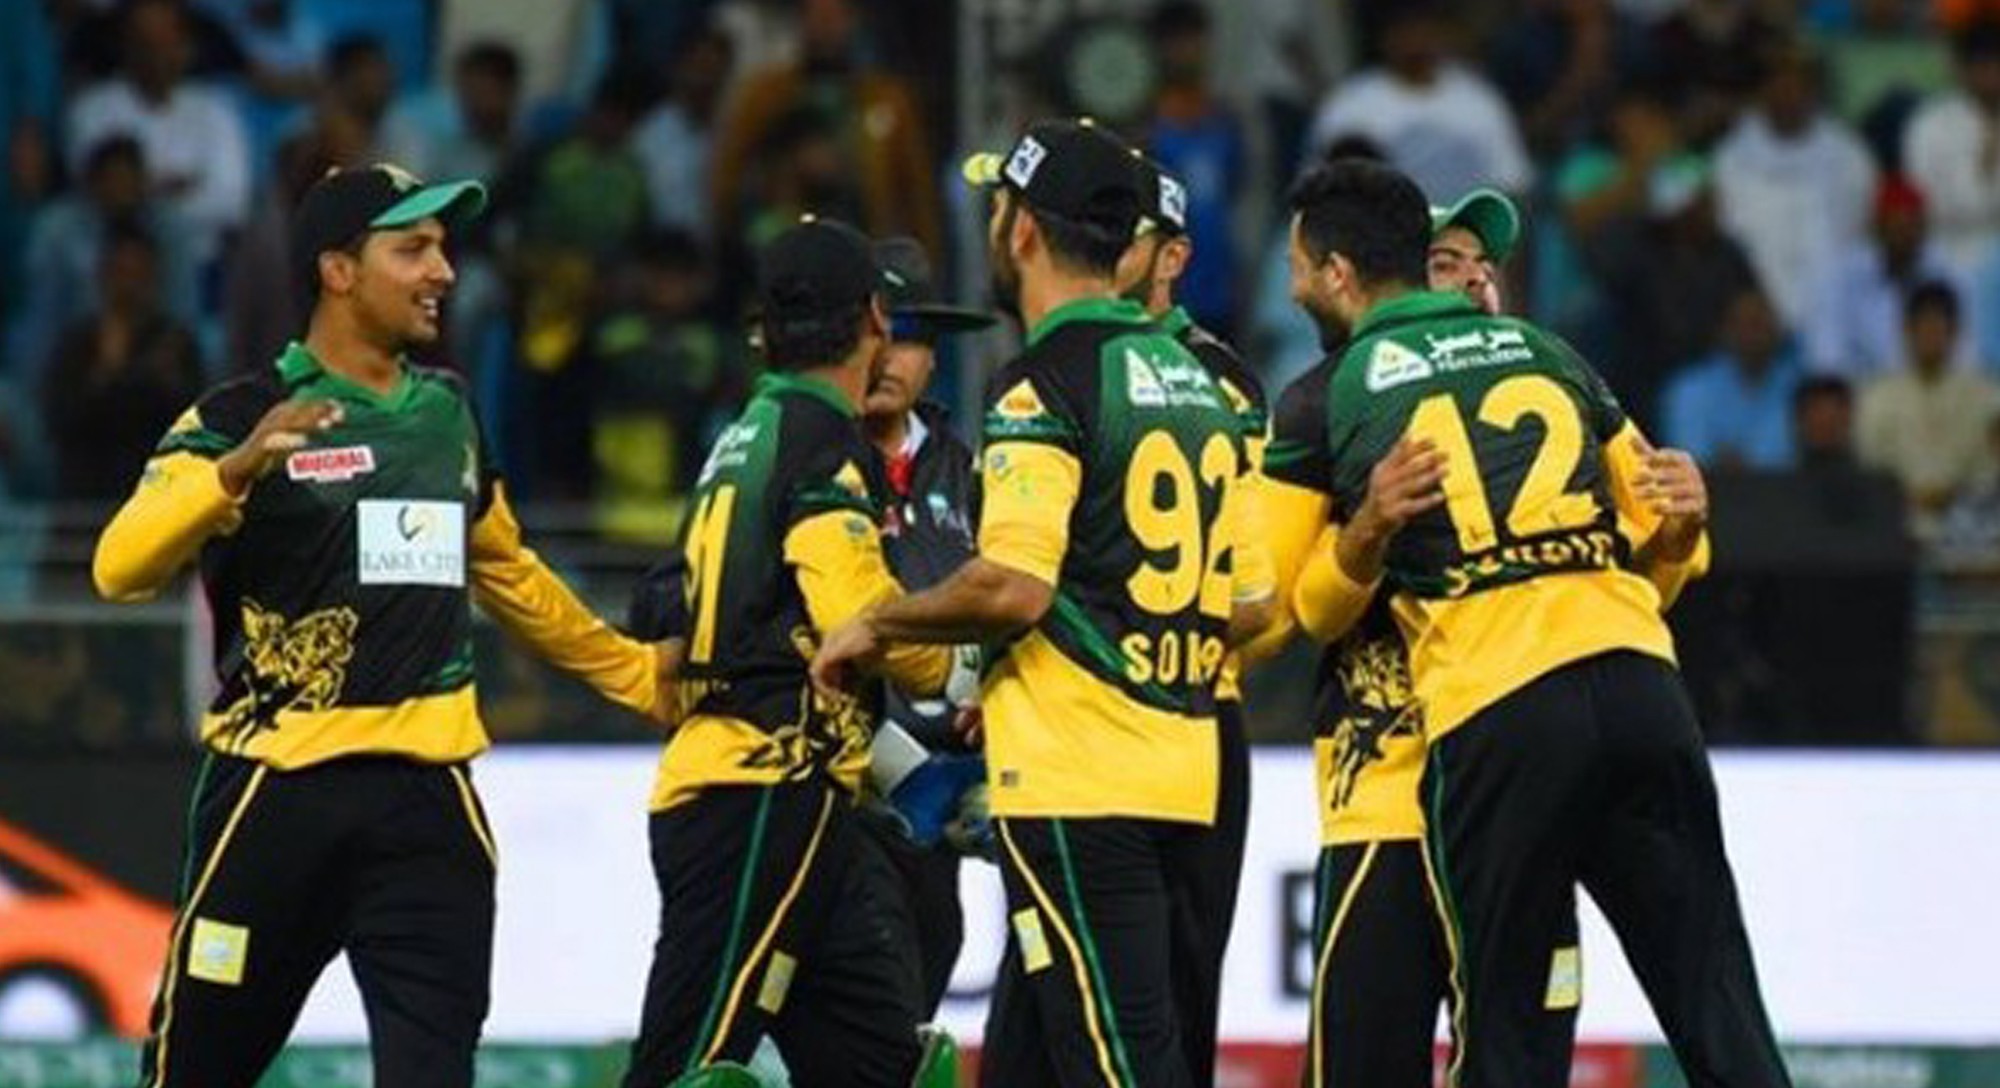 PB terminated Multan Sultans' franchise agreement with Schon Group (Pic. courtesy: PSL/Twitter)